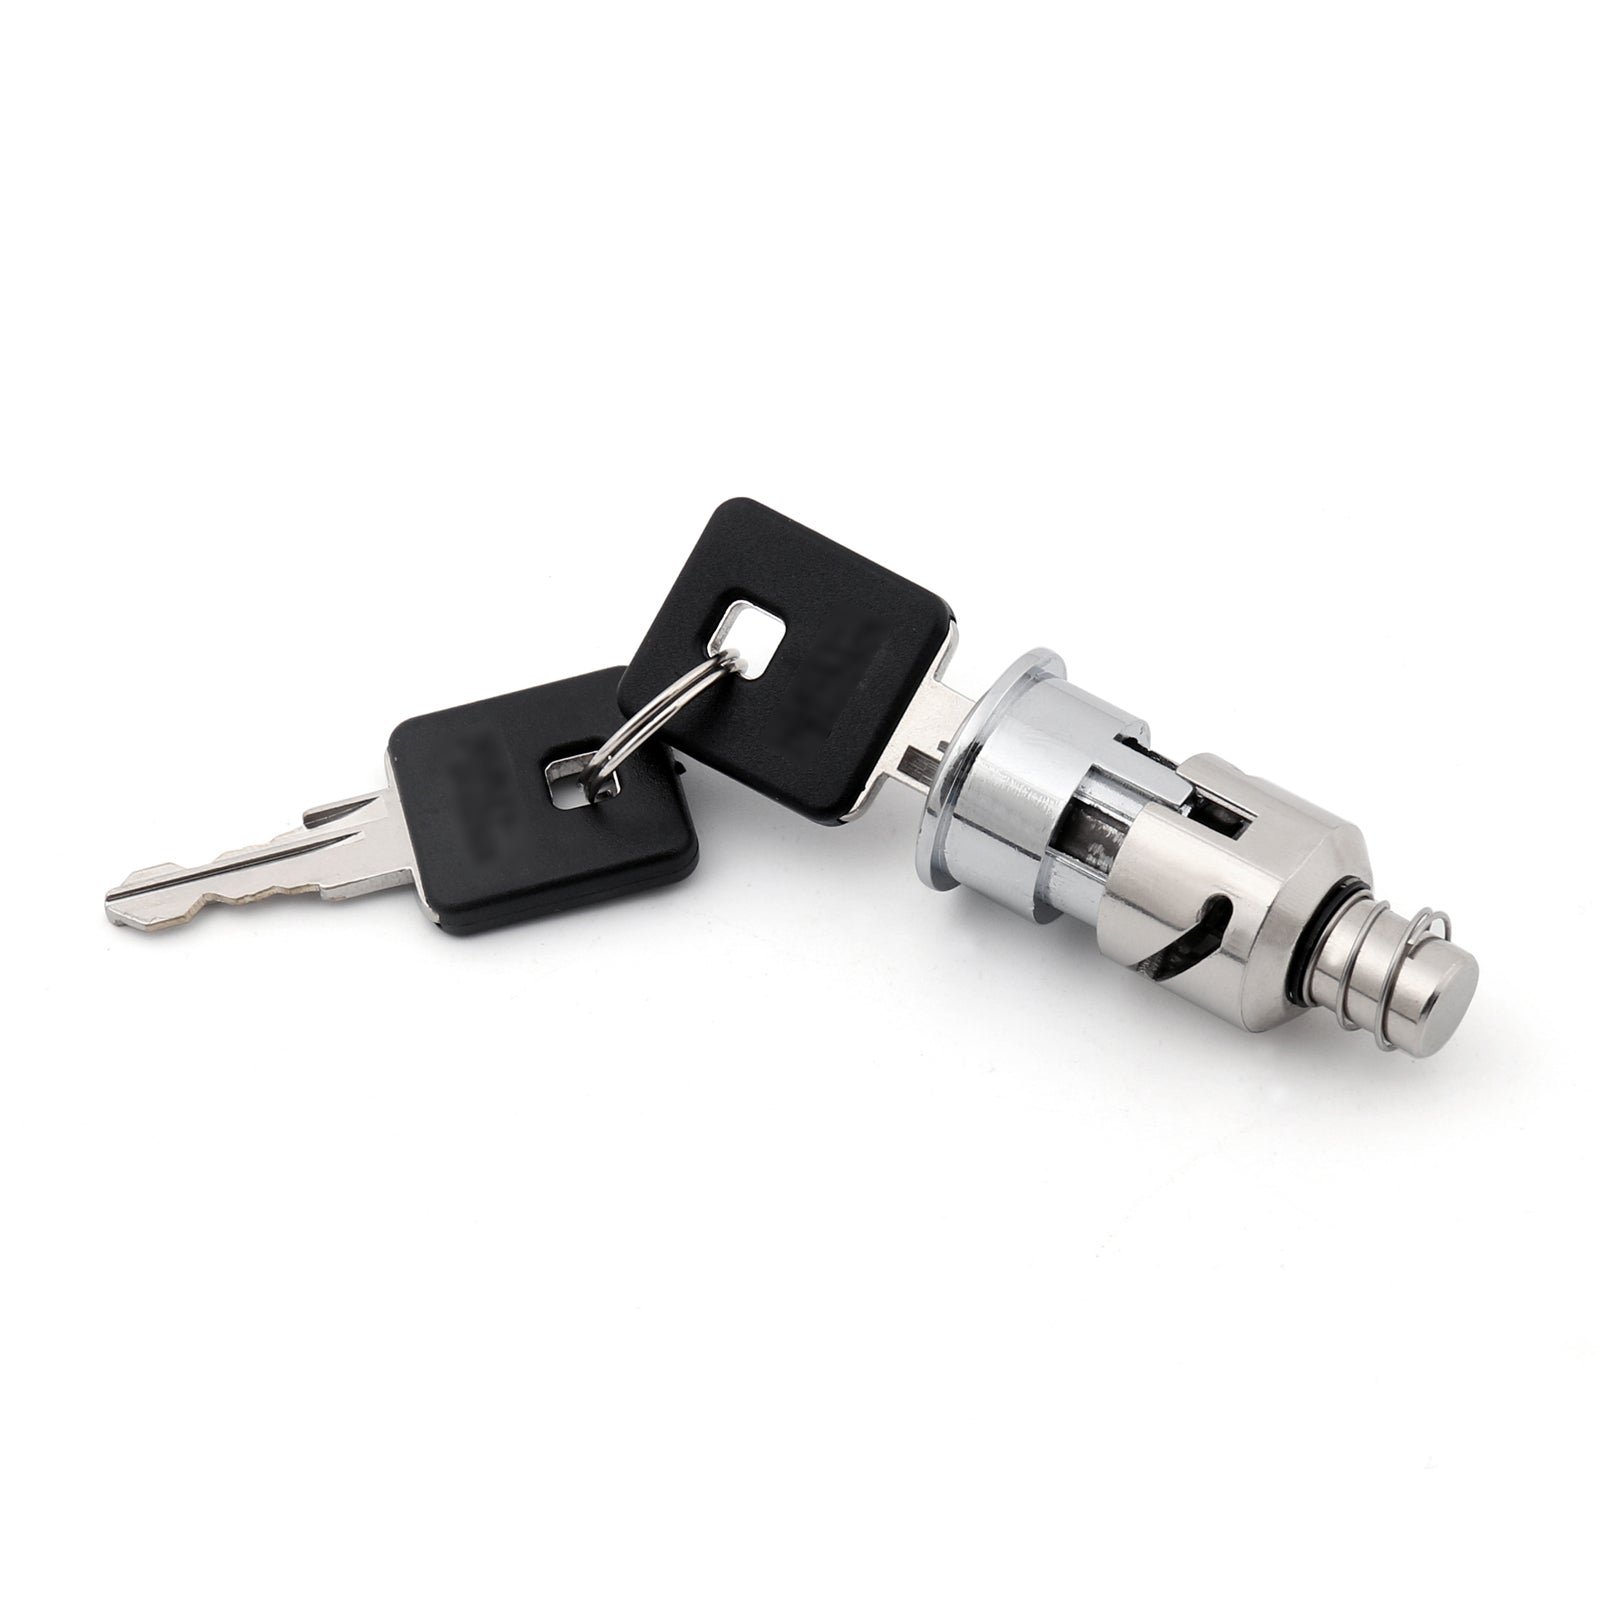 Pull Start Lock with 2 keys For Harley Sportster XL 883N and XL 1200N Models